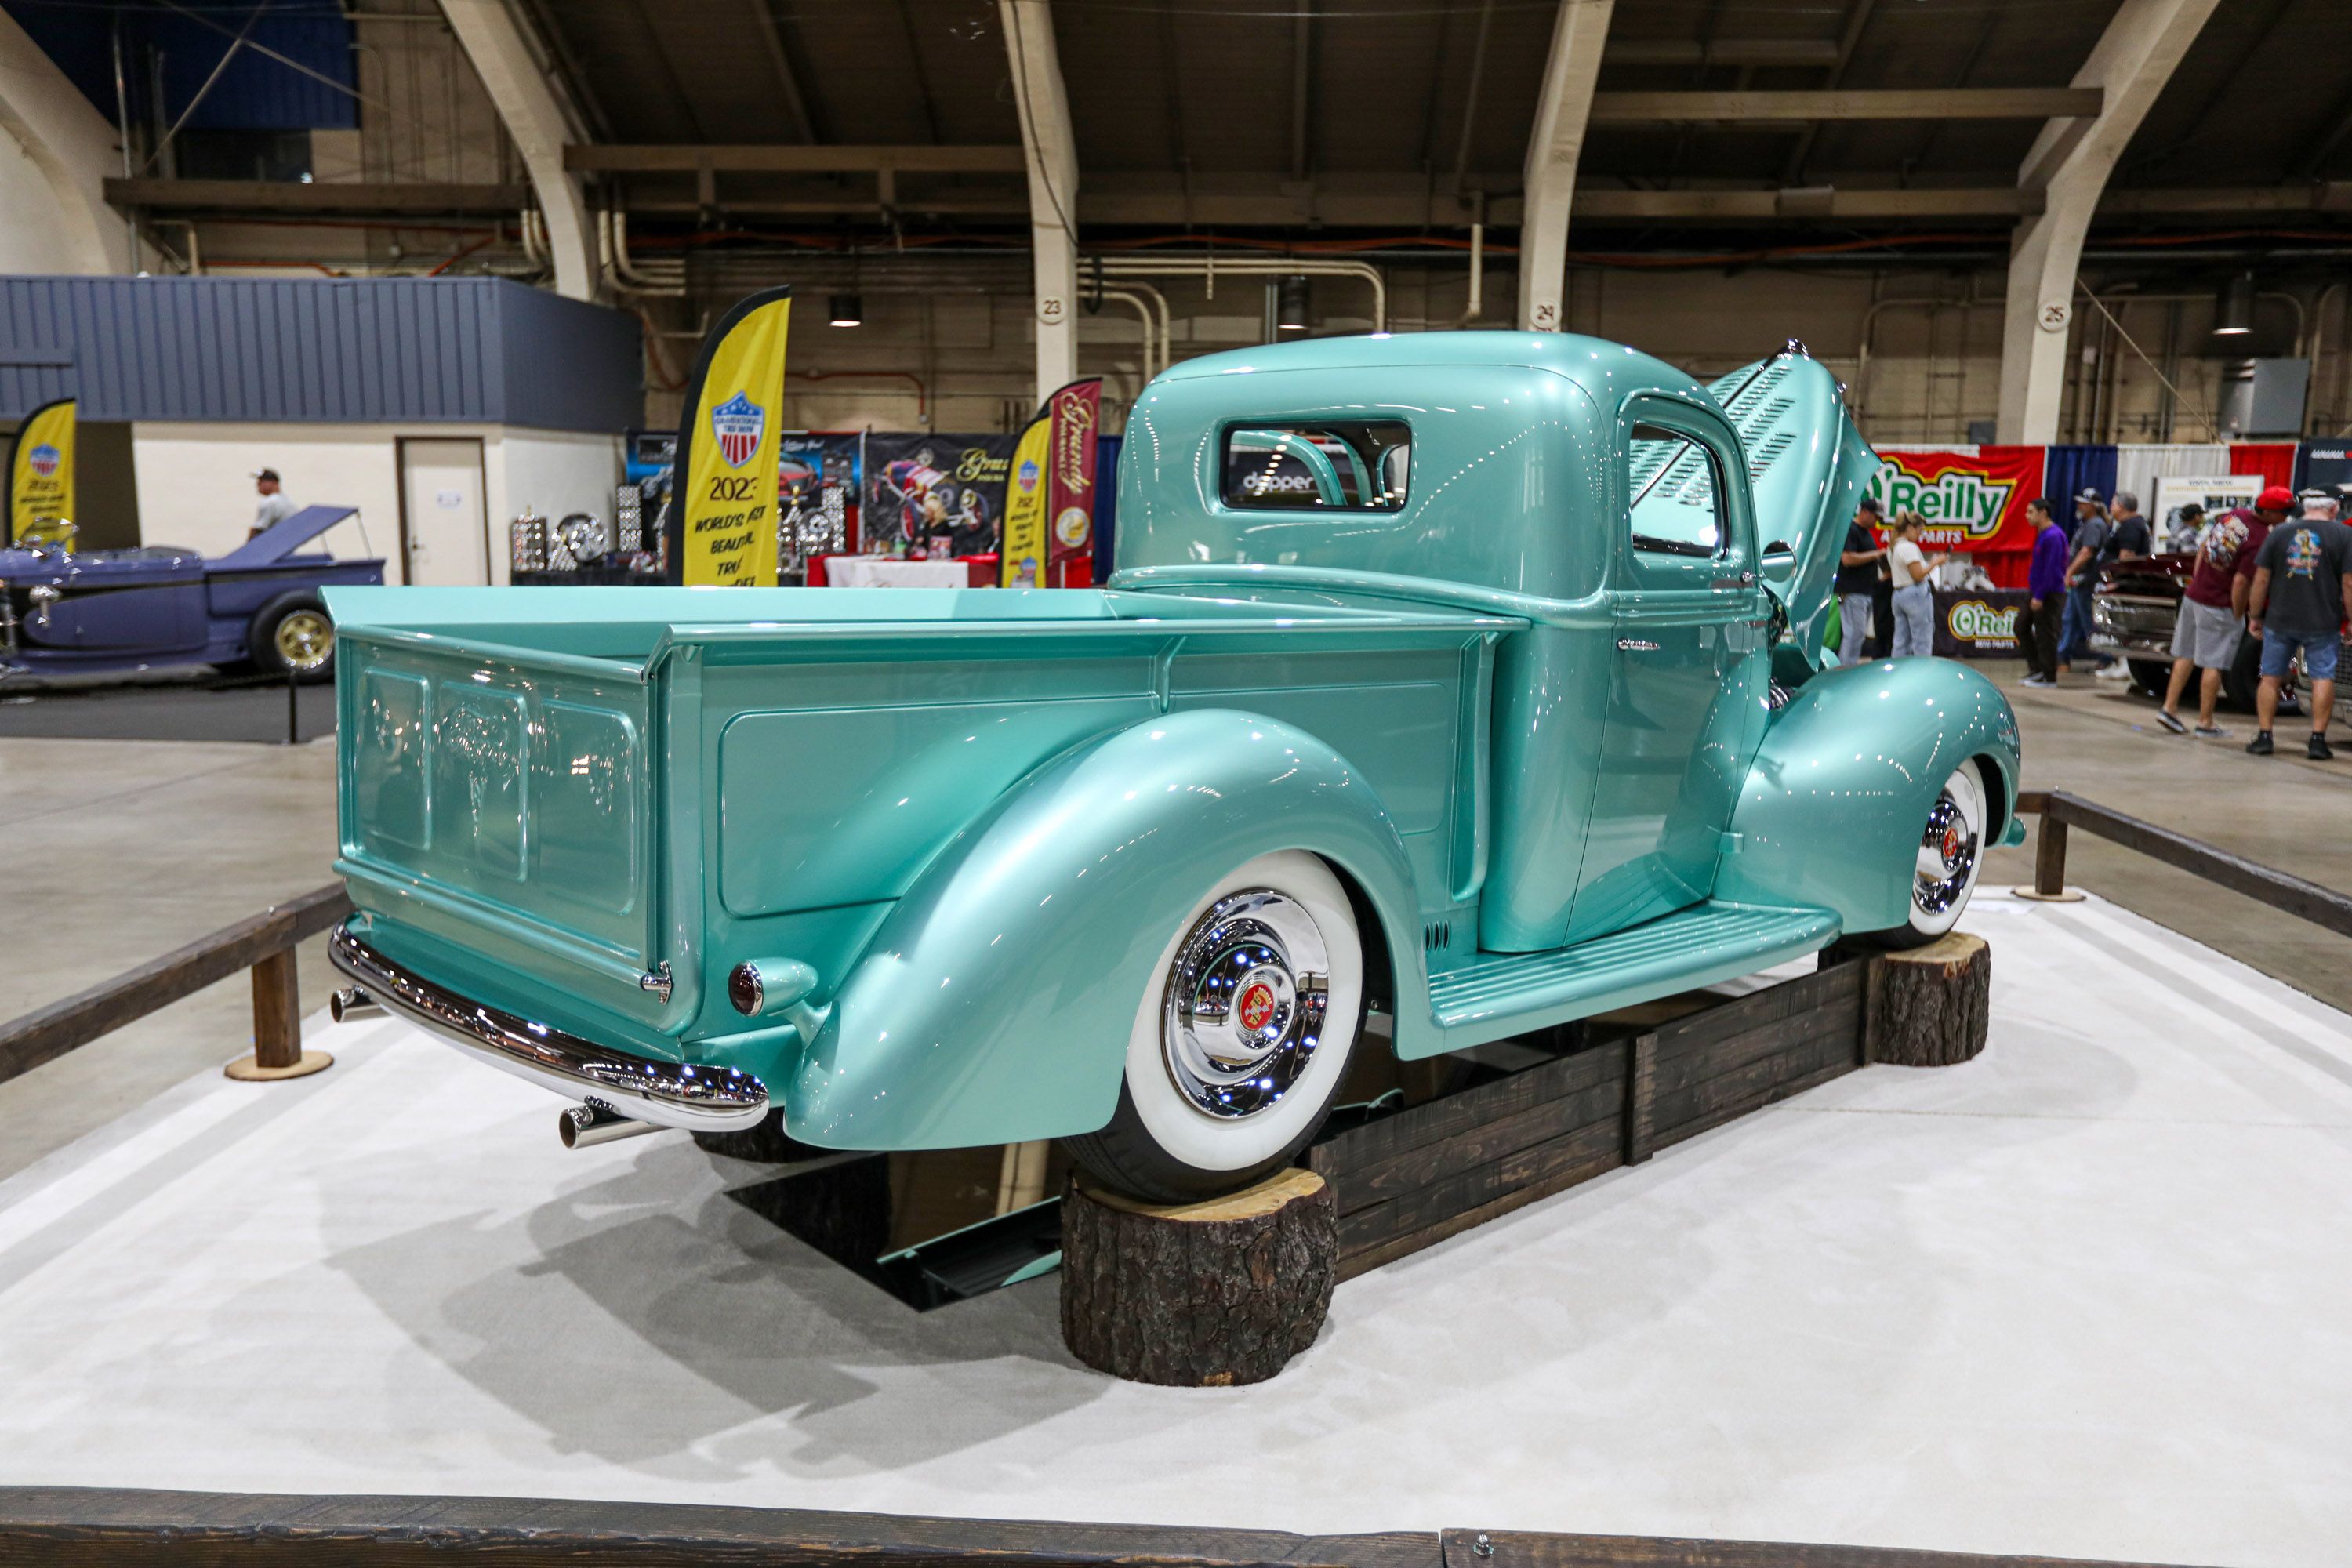 Stunningly Striking in Wonderful Blue: The 1940 Ford Claims Title of World’s Most Exquisite Truck